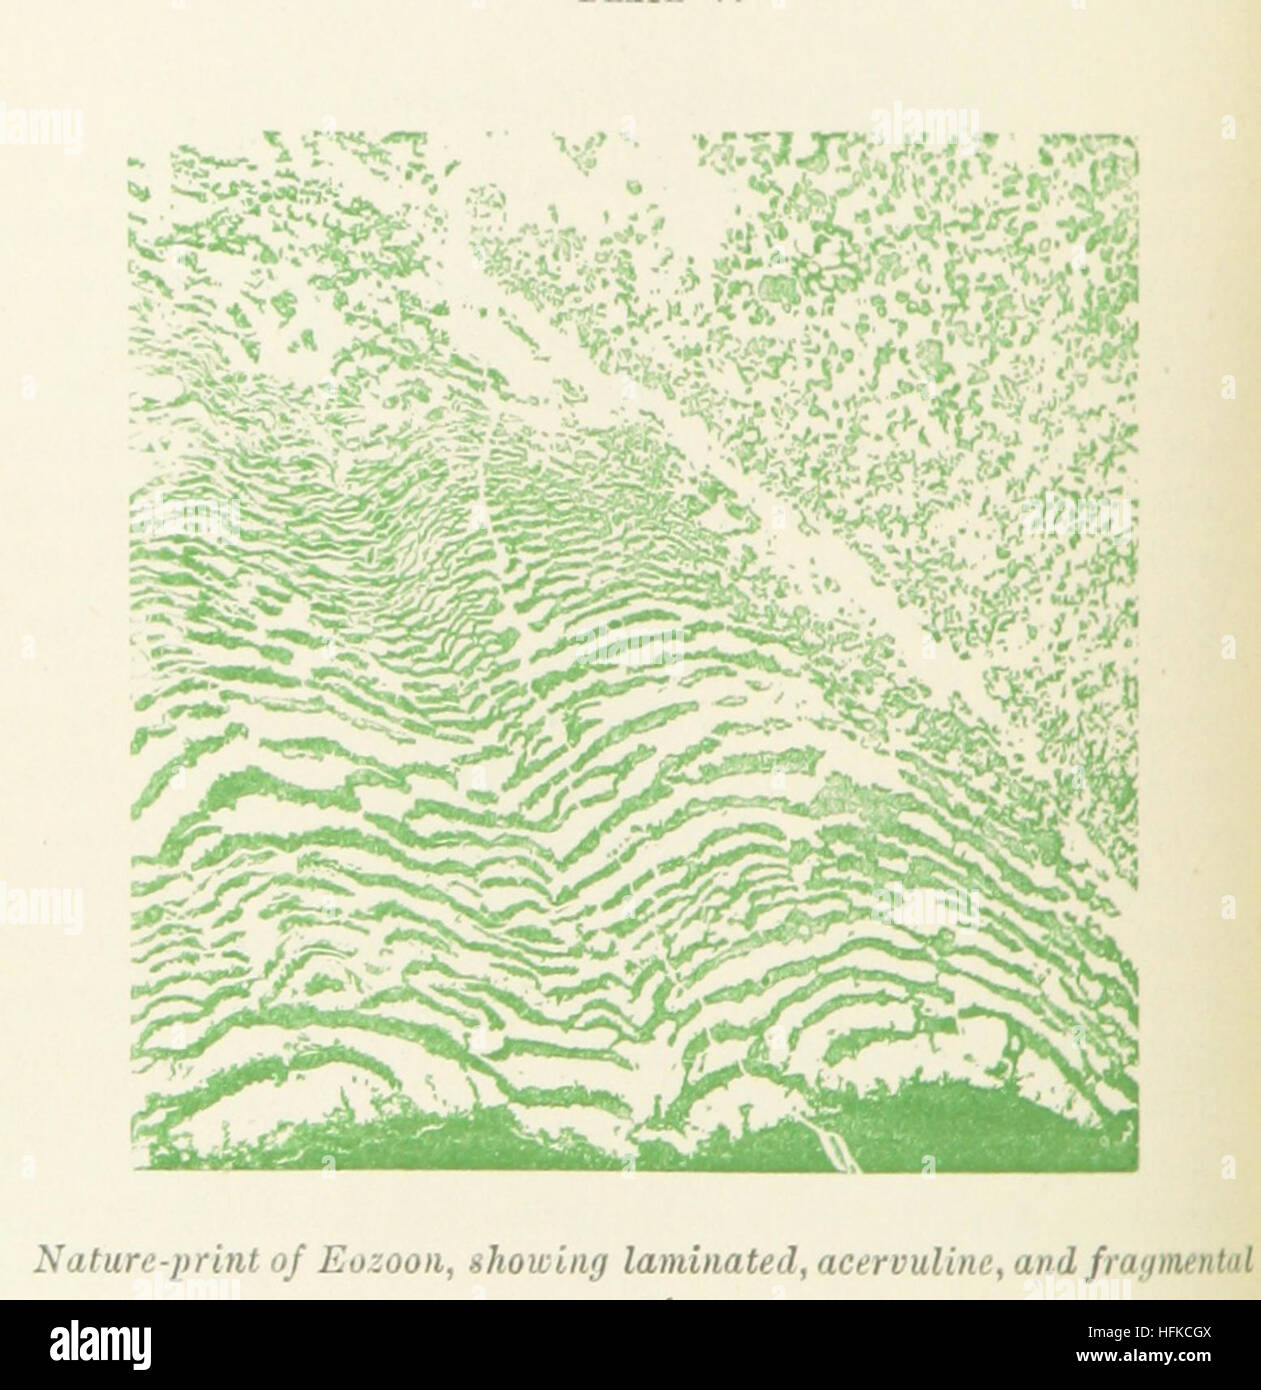 Life's Dawn on Earth: being the history of the oldest known fossil remains, and their relations to geological time and to the development of the animal kingdom ... Second thousand Image taken from page 120 of 'Life's Dawn on Earth Stock Photo